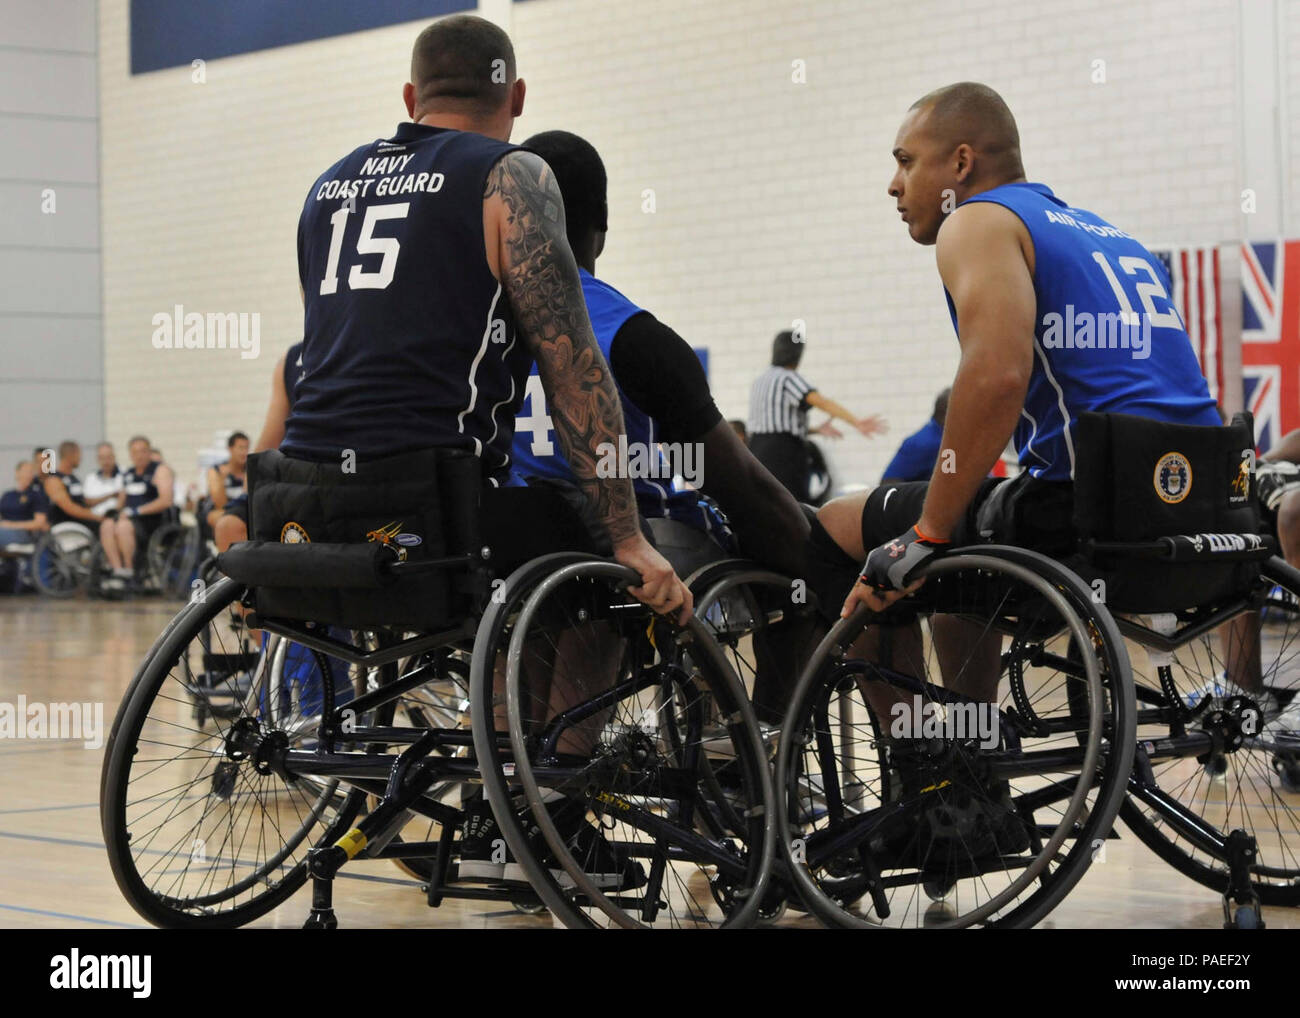 Team Navy/Coast Guard member retired Aviation Electrician's Mate Steven Davis of Turlock, Calif., blocks opposing team members in a wheelchair basketball game against Team Air Force during the 2013 Warrior Games May 14. The Warrior Games includes competitions in archery, cycling, seated volleyball, shooting, swimming, track and field, and wheelchair basketball. The goal of the Warrior Games is not necessarily to identify the most skilled athletes, but rather to demonstrate the incredible potential of wounded warriors through competitive sports. More than 200 wounded, ill, or injured service me Stock Photo